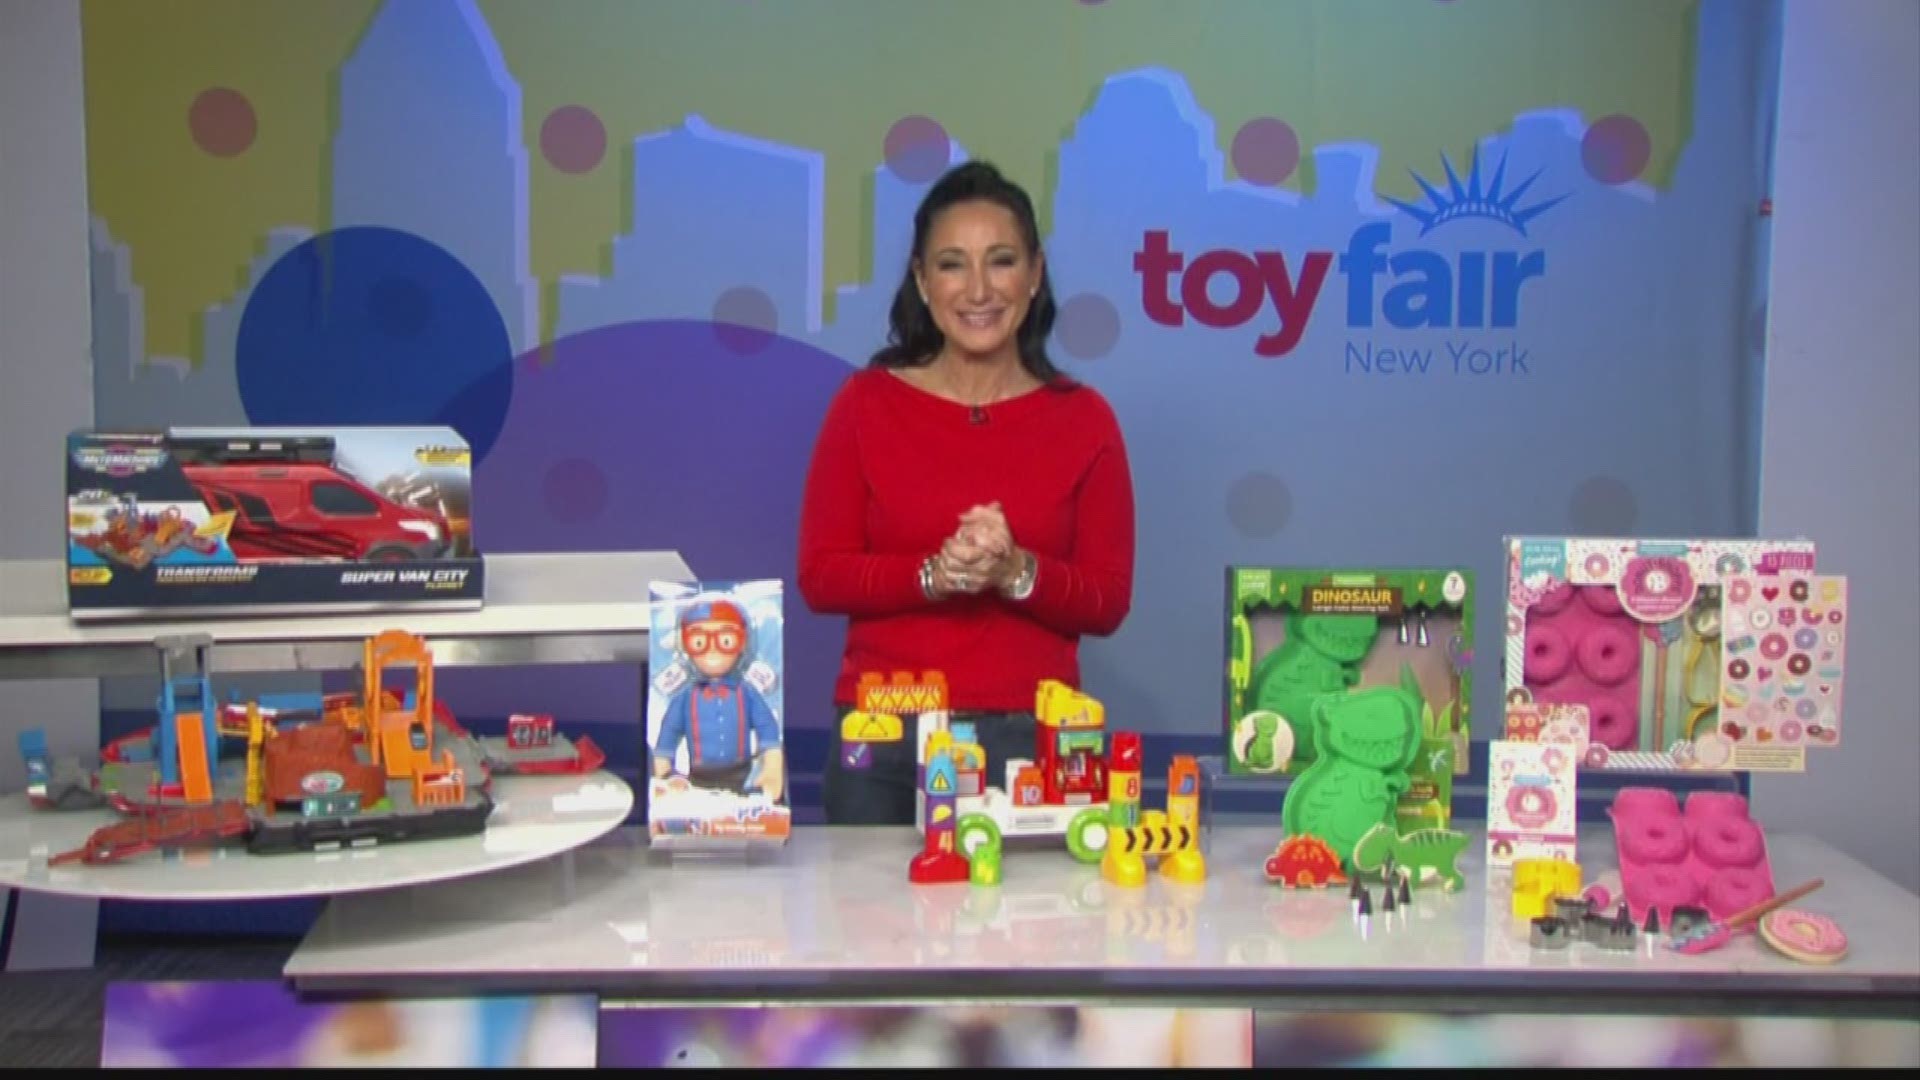 From retro toys to toys seen on Youtube, there's something for everyone!